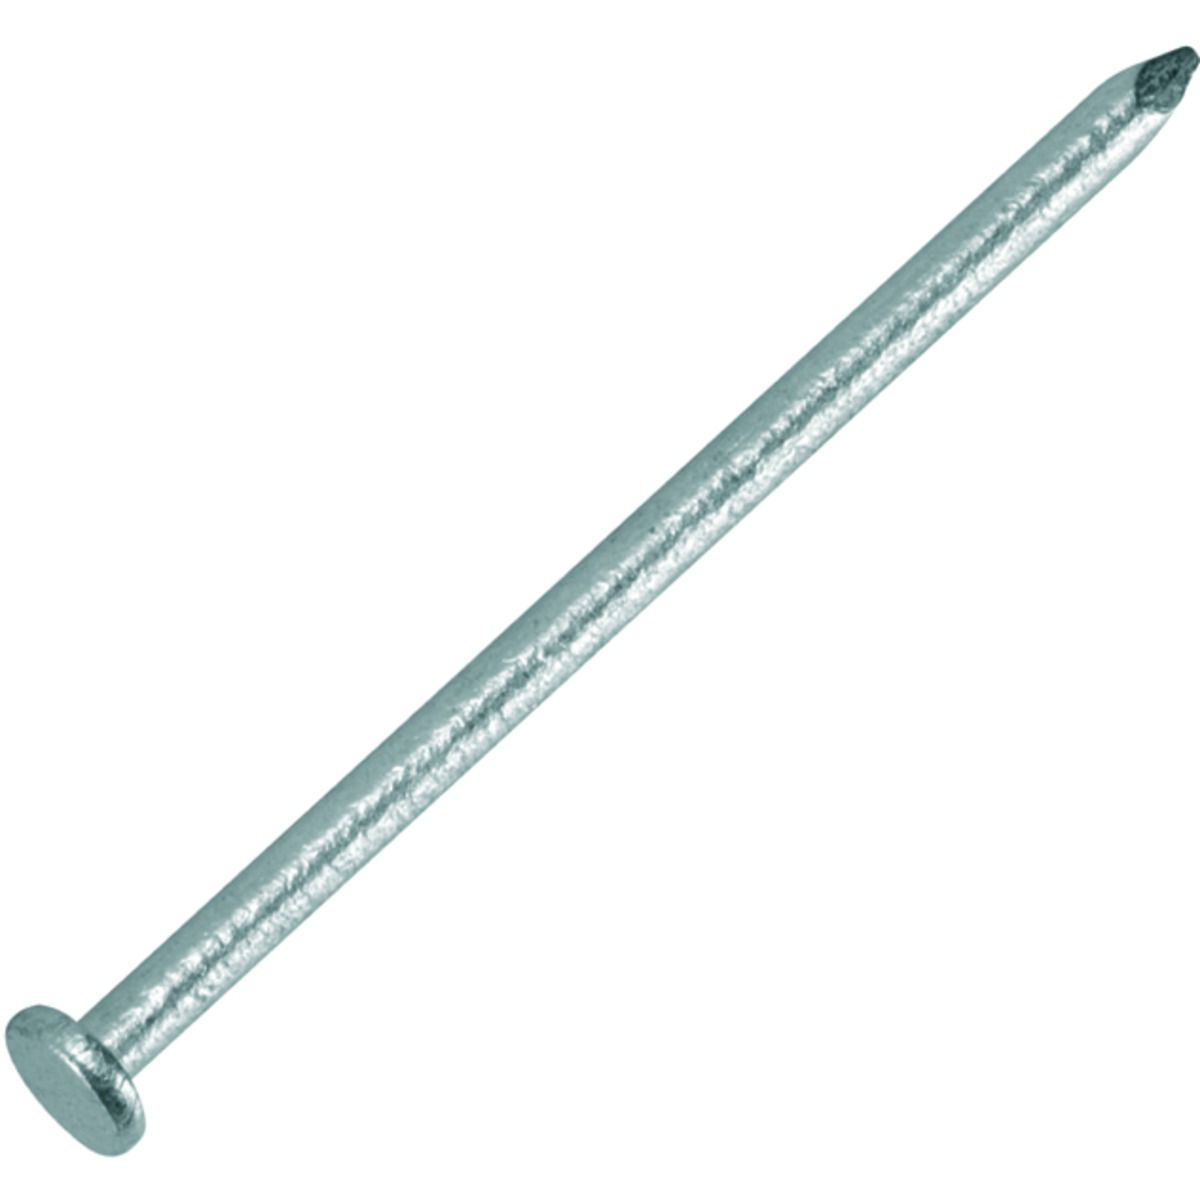 Image of Wickes 75mm Galvanised Round Wire Nails - 400g